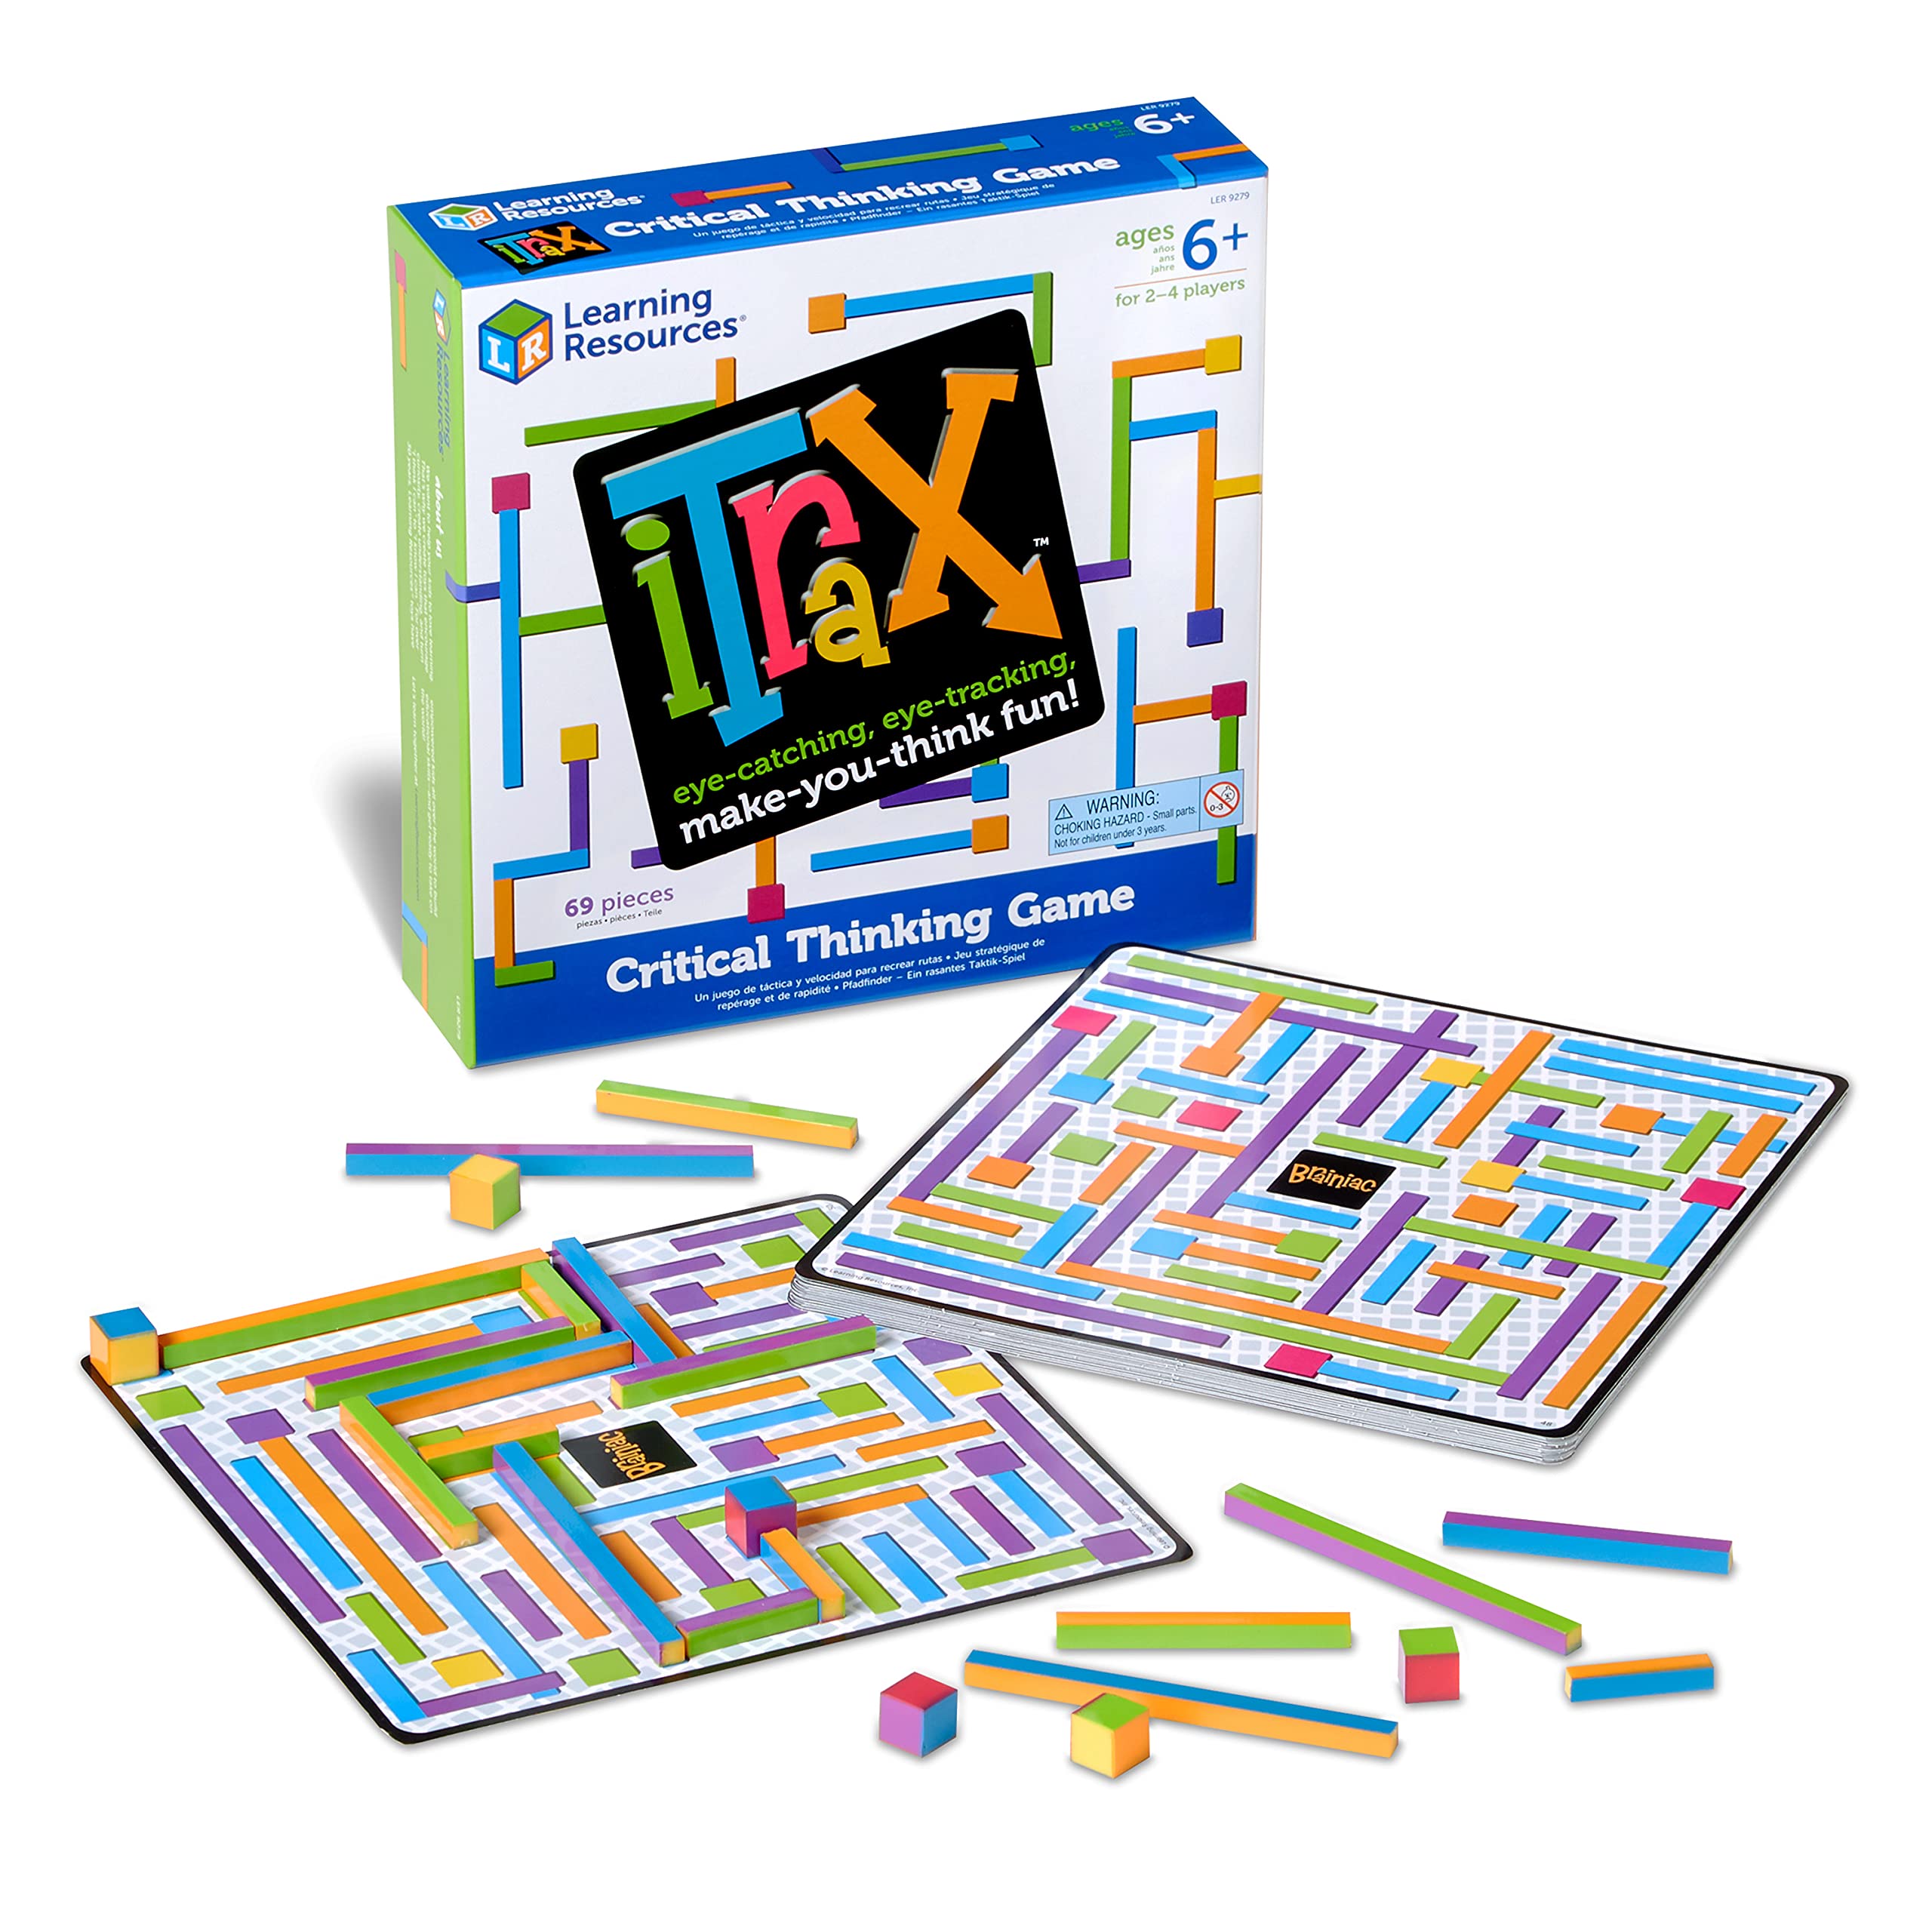 Book Cover Learning Resources iTrax Critical Thinking Game - 69 Pieces, Ages 6+ Brainteaser Games for Kids, Develops Critical Thinking Skills, Board Games